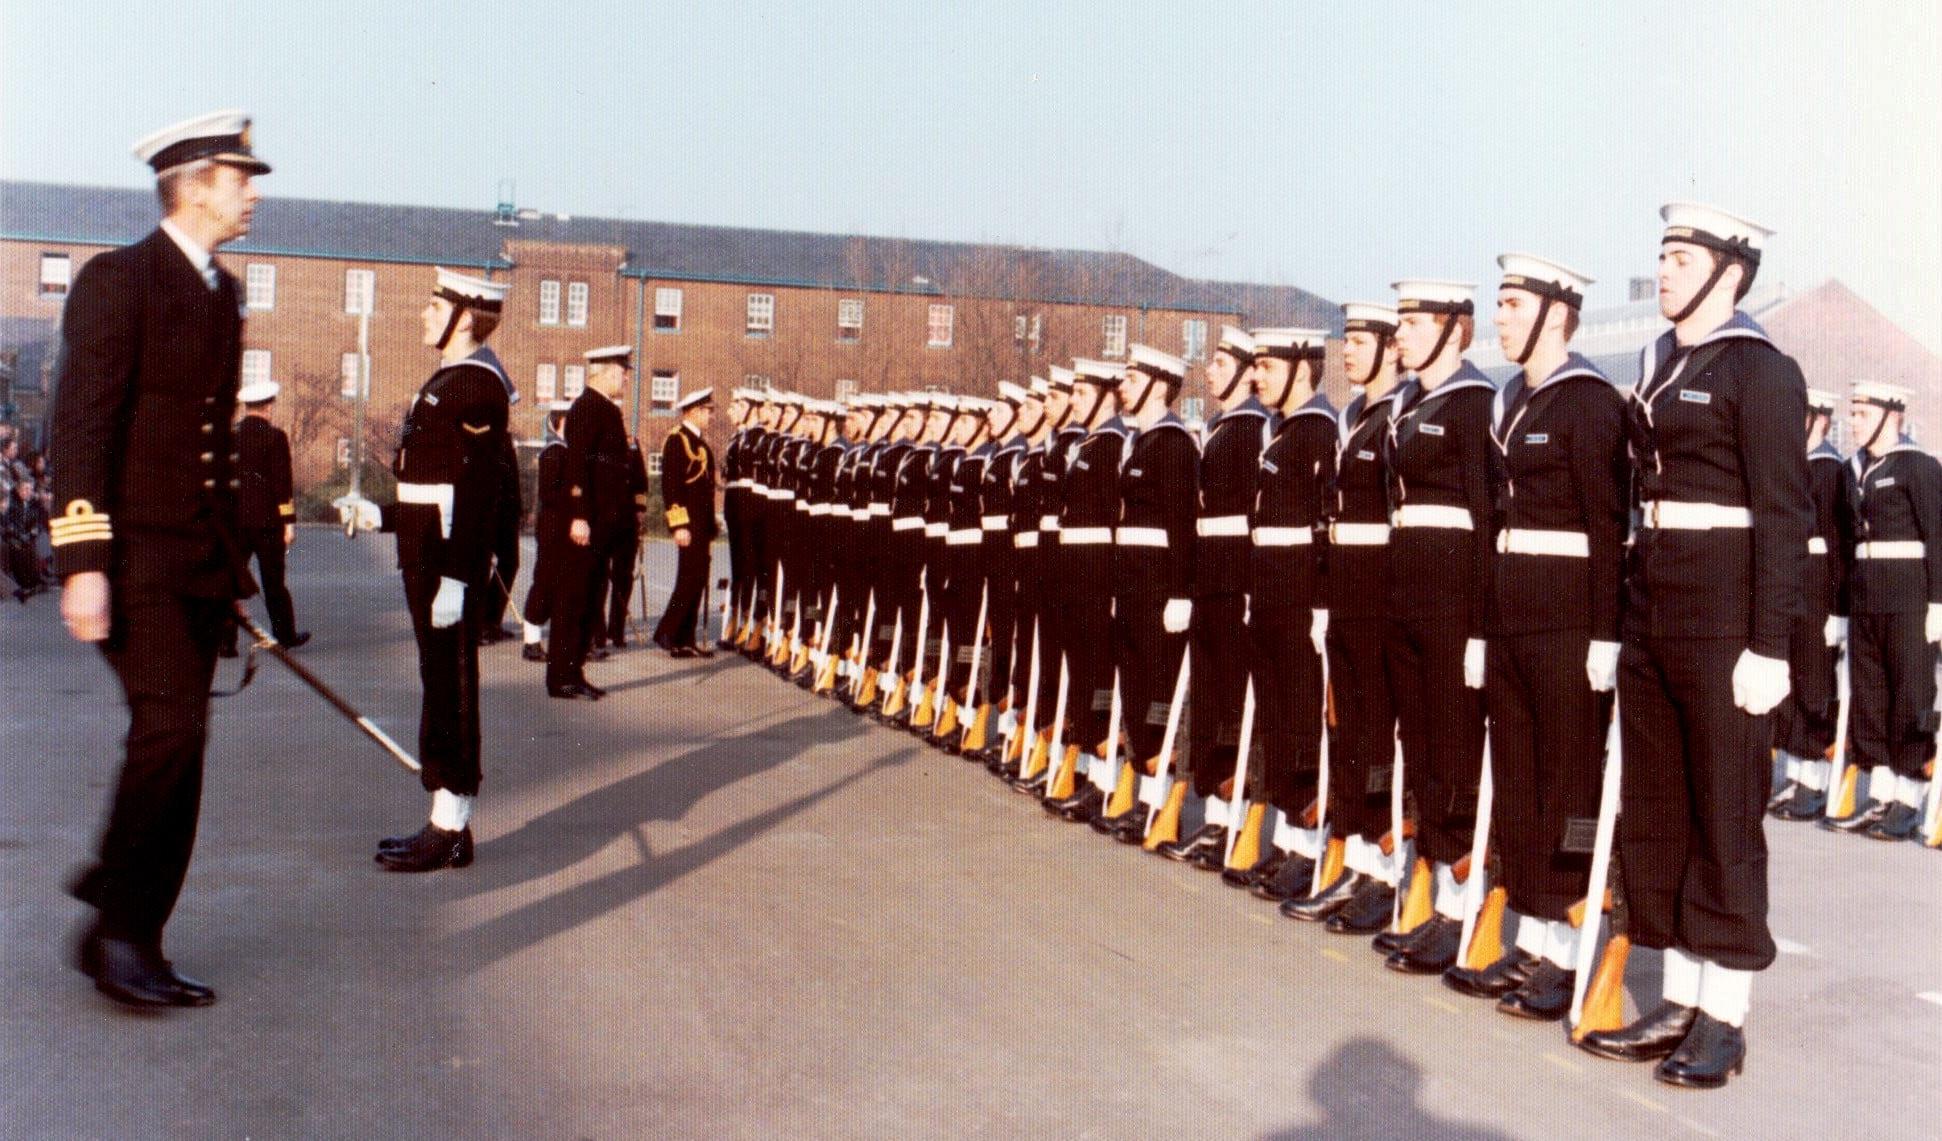 1975, 9TH DECEMBER - STEVE LADDS, LEANDER DIV., PASSING OUT GUARD, IM THE SMALL ONE IN MIDDLE, CLASS LEADER IS BRYAN PERKS.